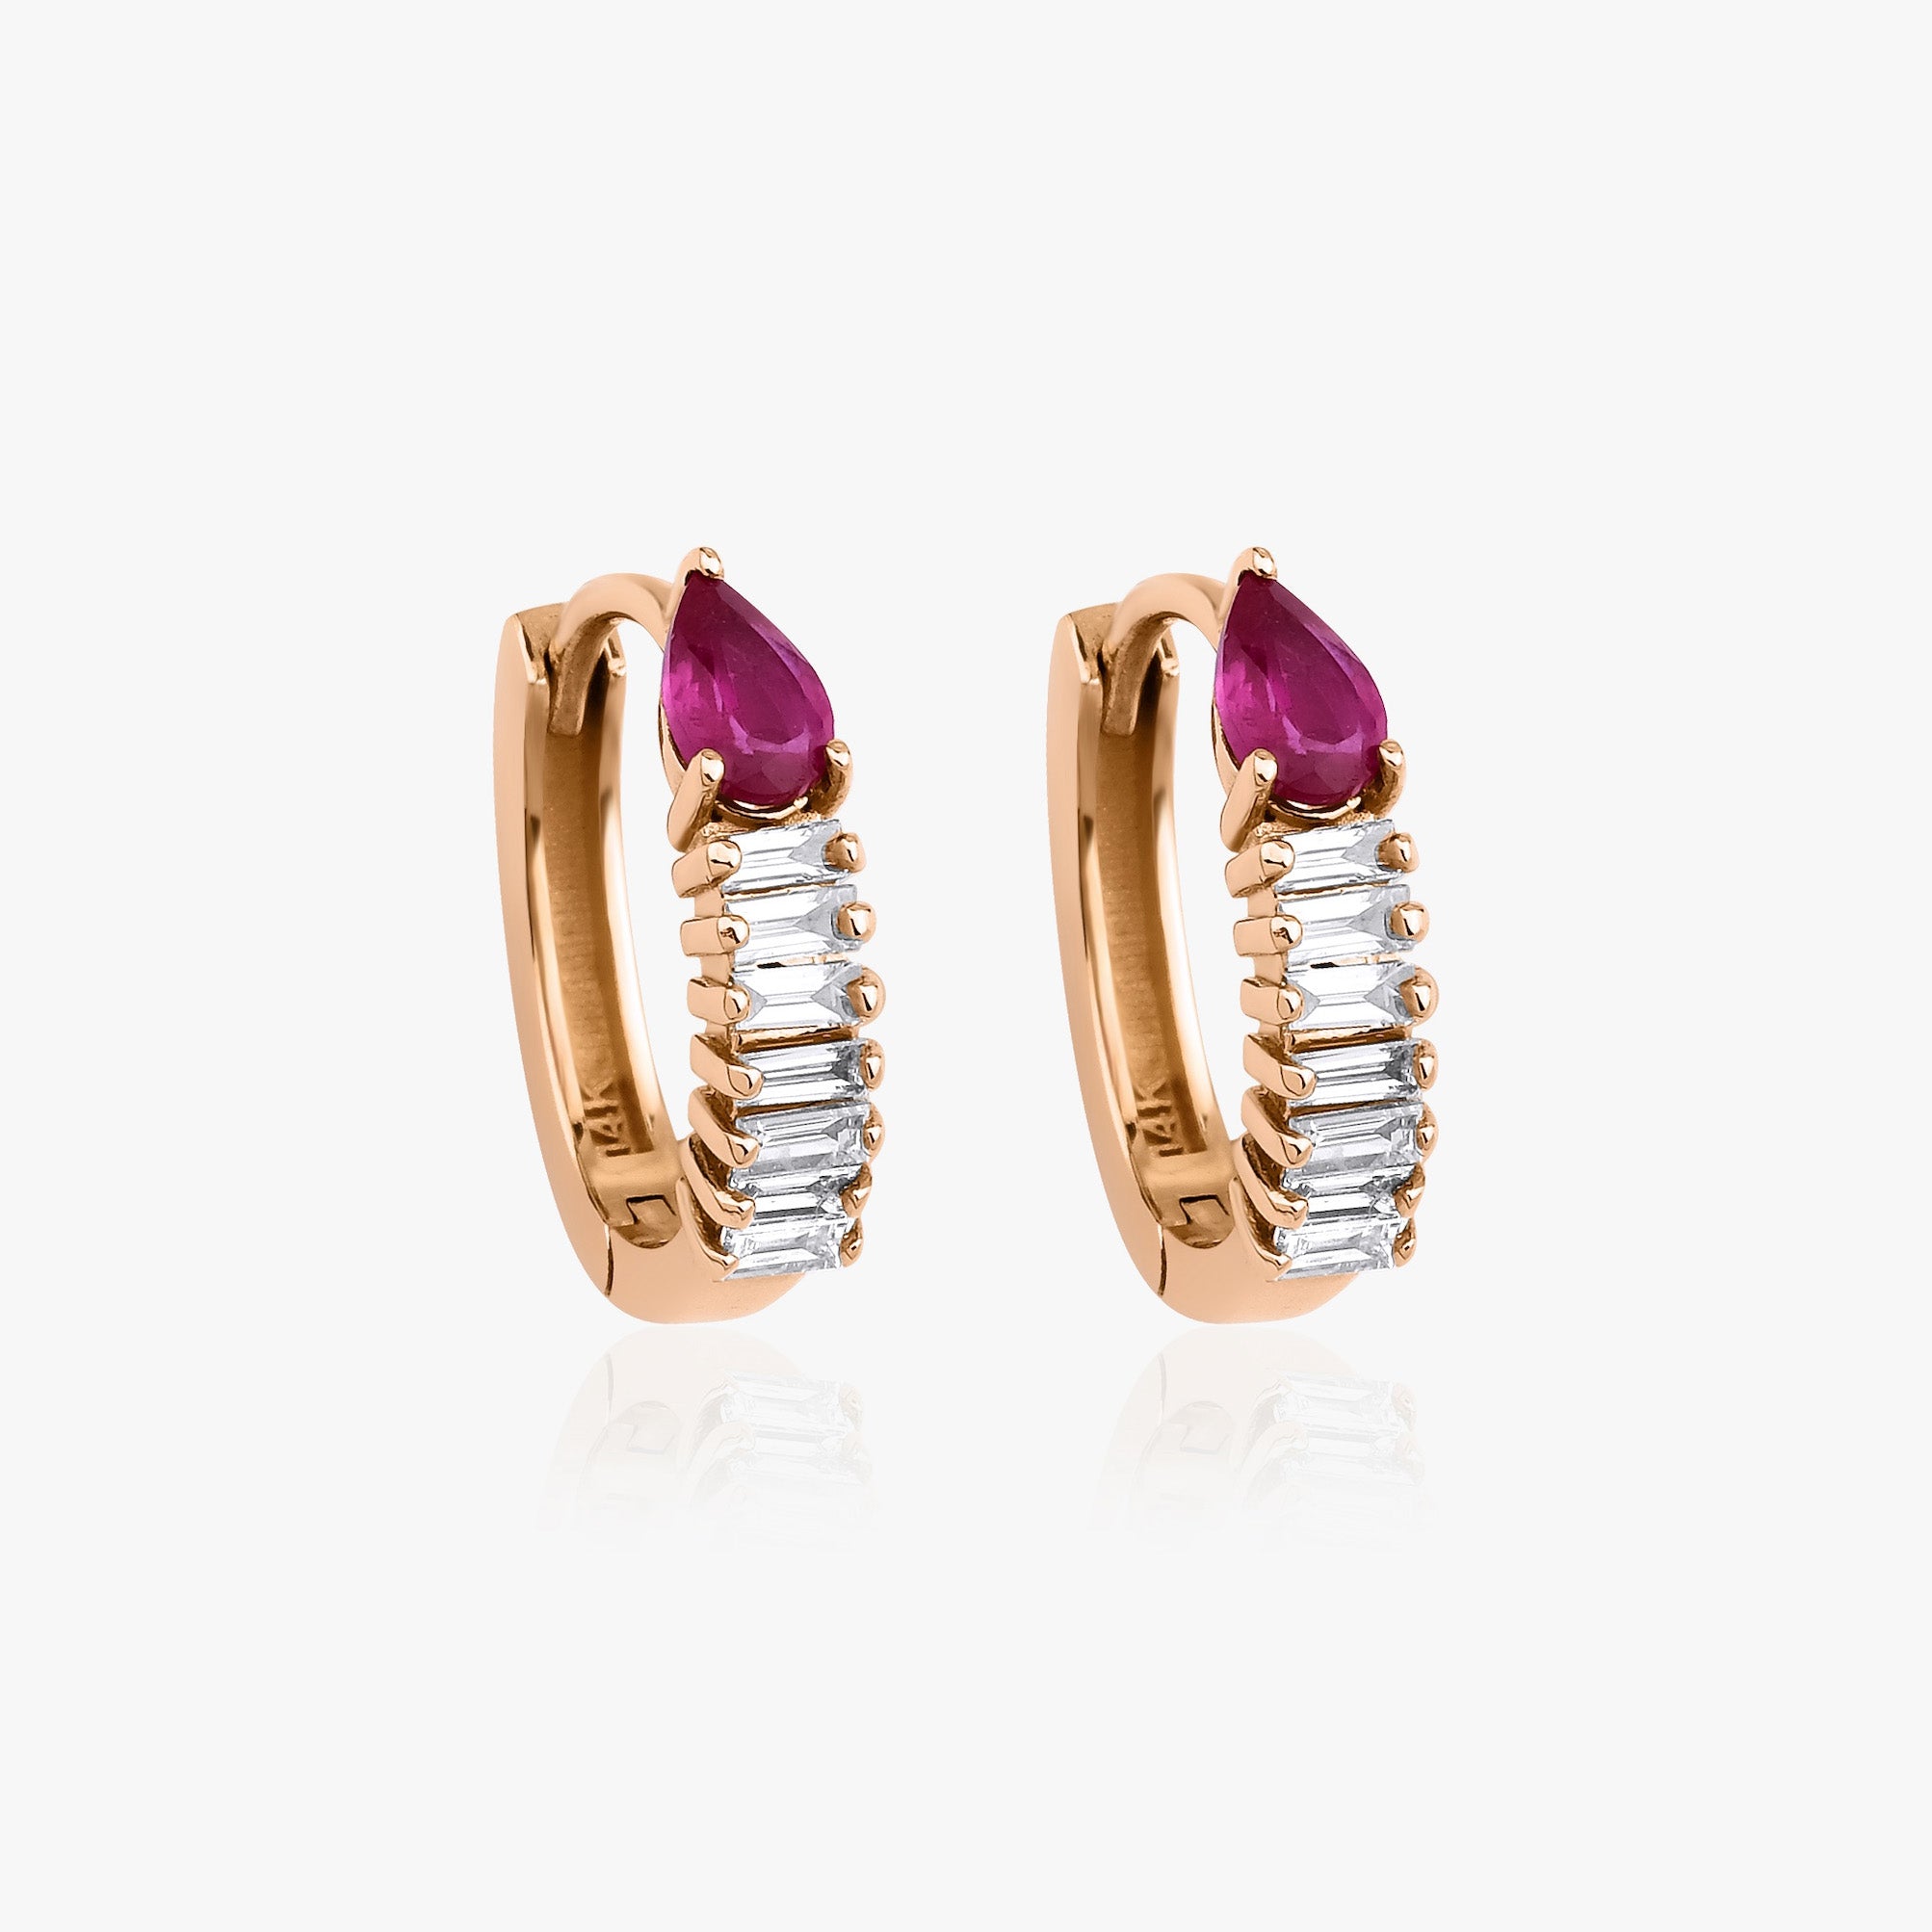 Baguette Cut Ruby and Diamond Hoop Earrings Available in 14K and 18K Gold